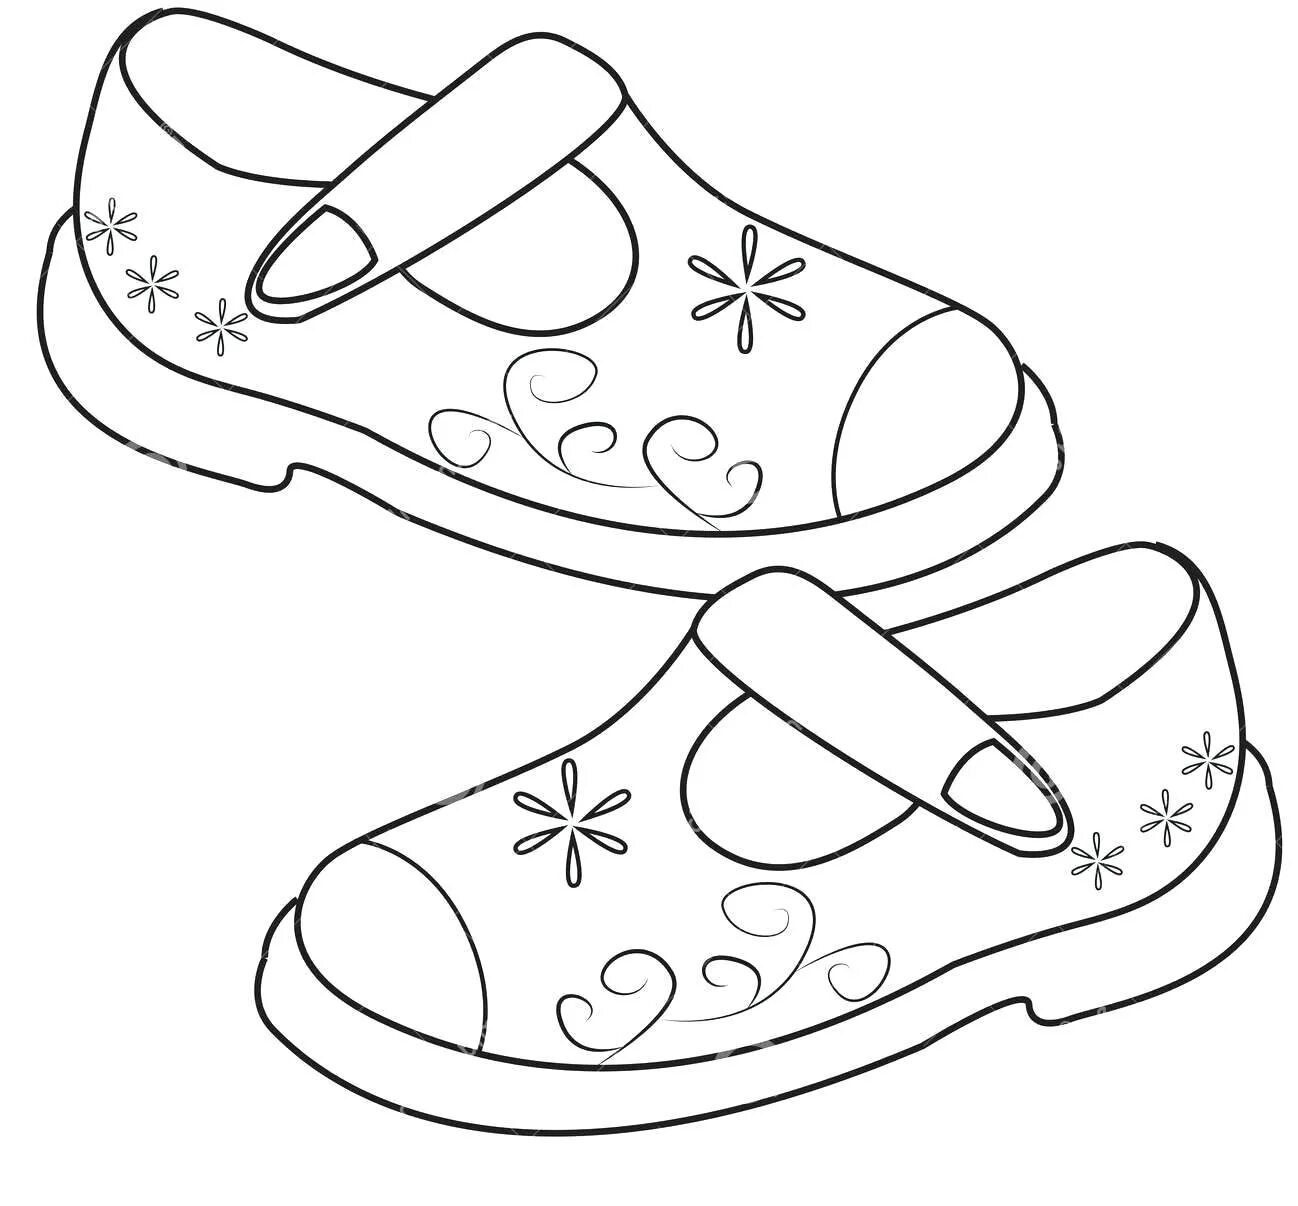 Coloring page attractive shoes for children 4-5 years old